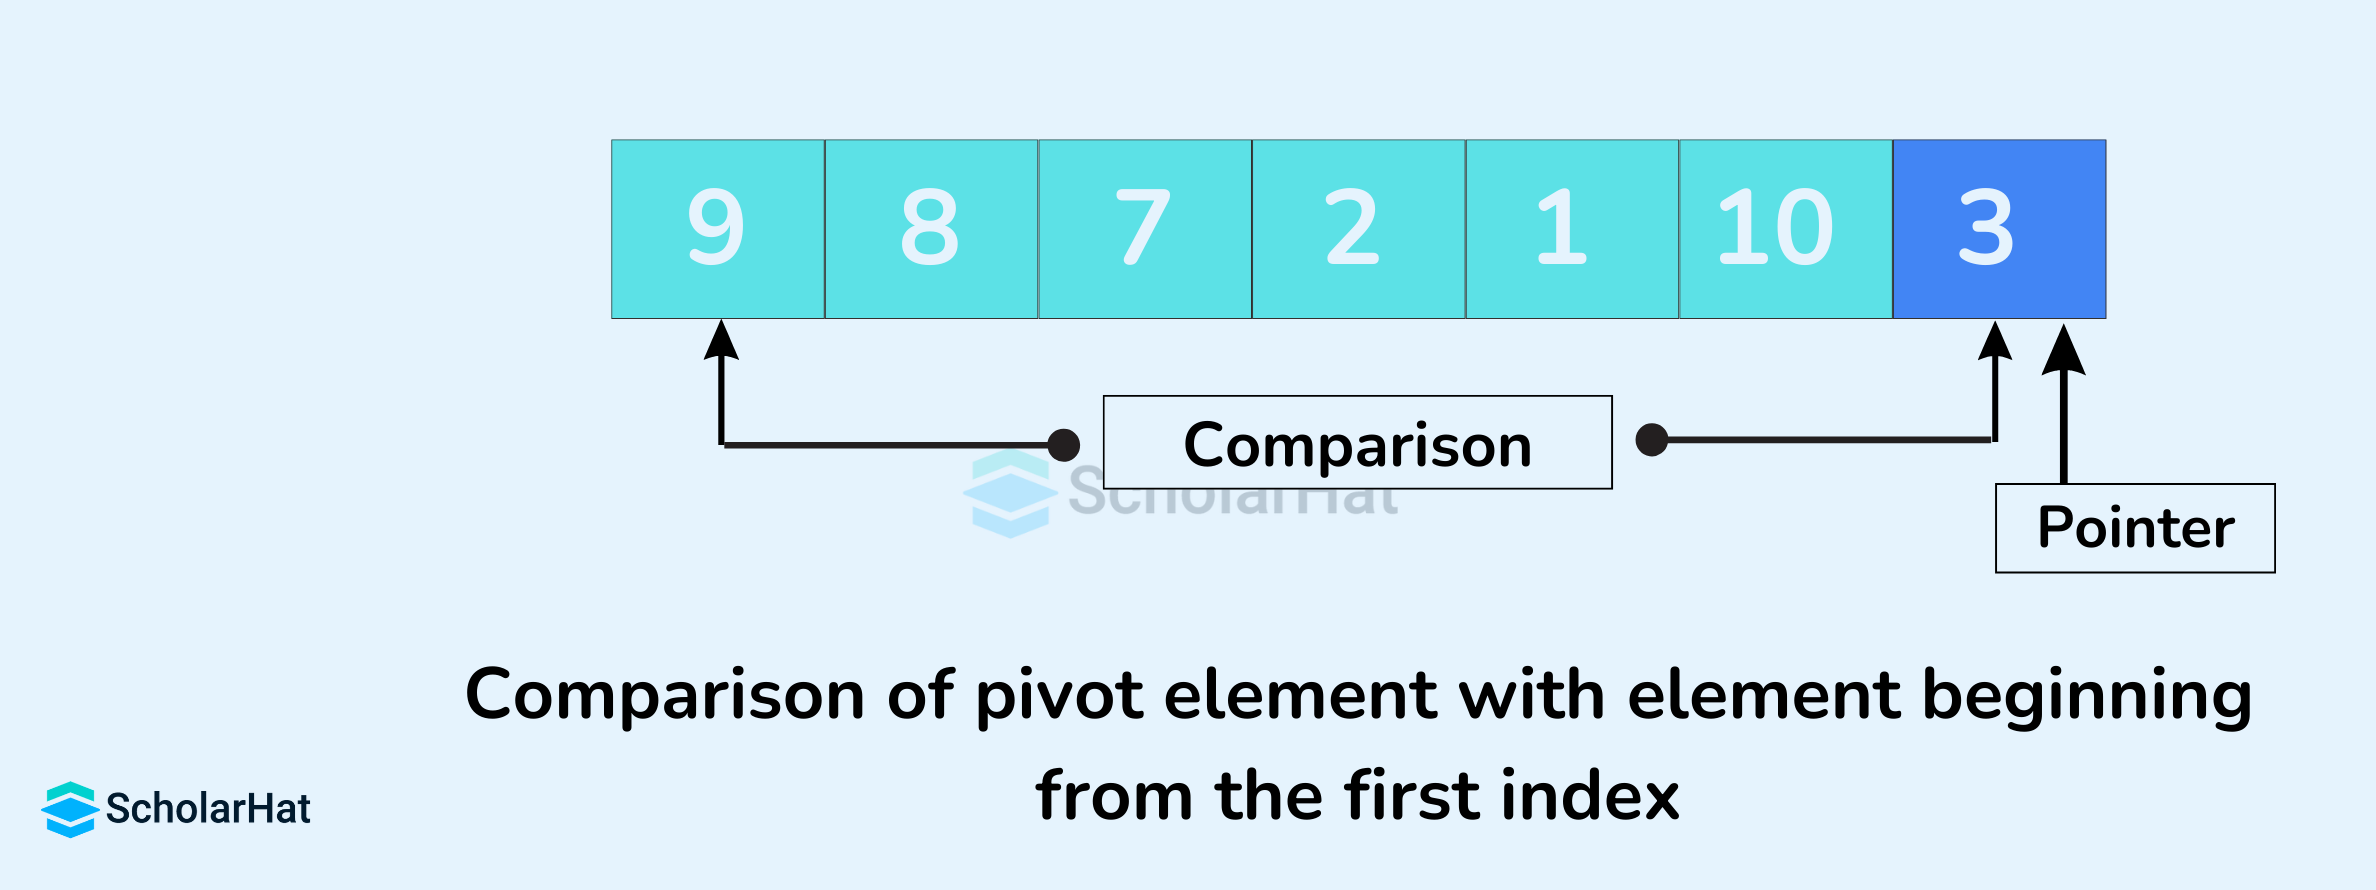 Comparison of pivot element with element beginning from the first index